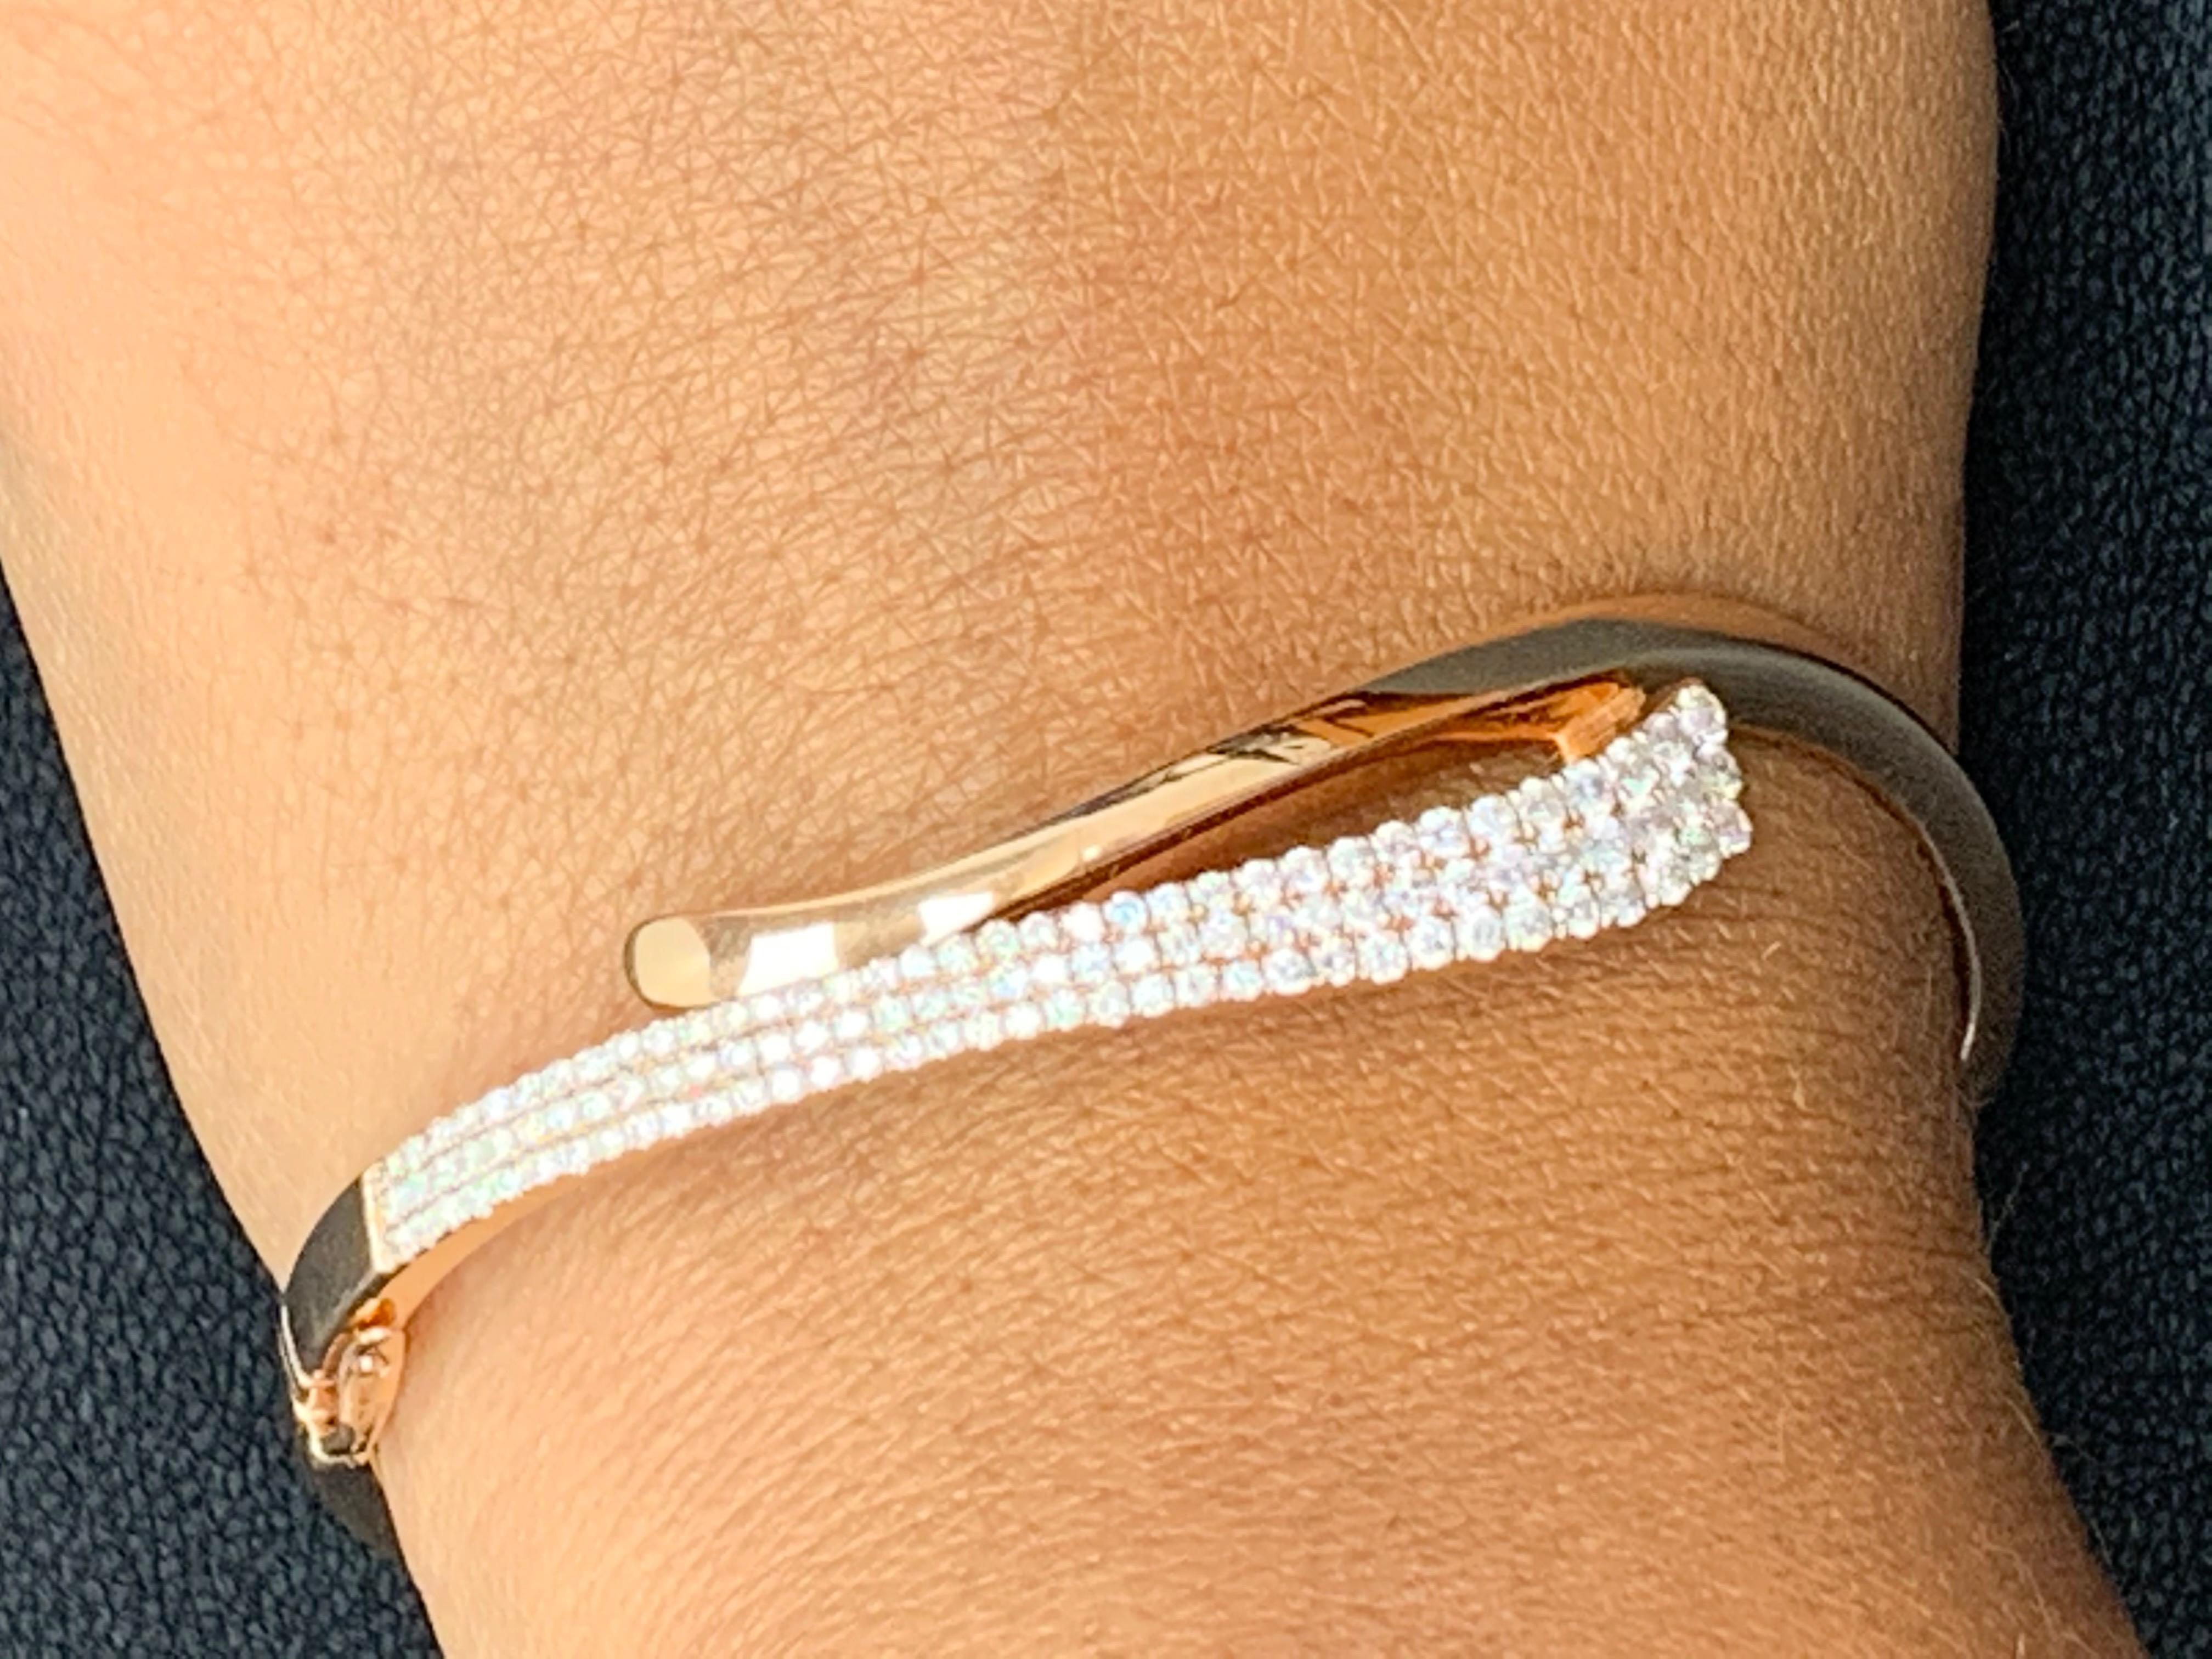 A simple yet elegant piece of jewelry set with 108 round brilliant diamonds in pave set weighing 1.36 carats total. Has a clasp for ease of wear and to secure the bangle in place. Made in 14k rose gold.

All diamonds are GH color SI1